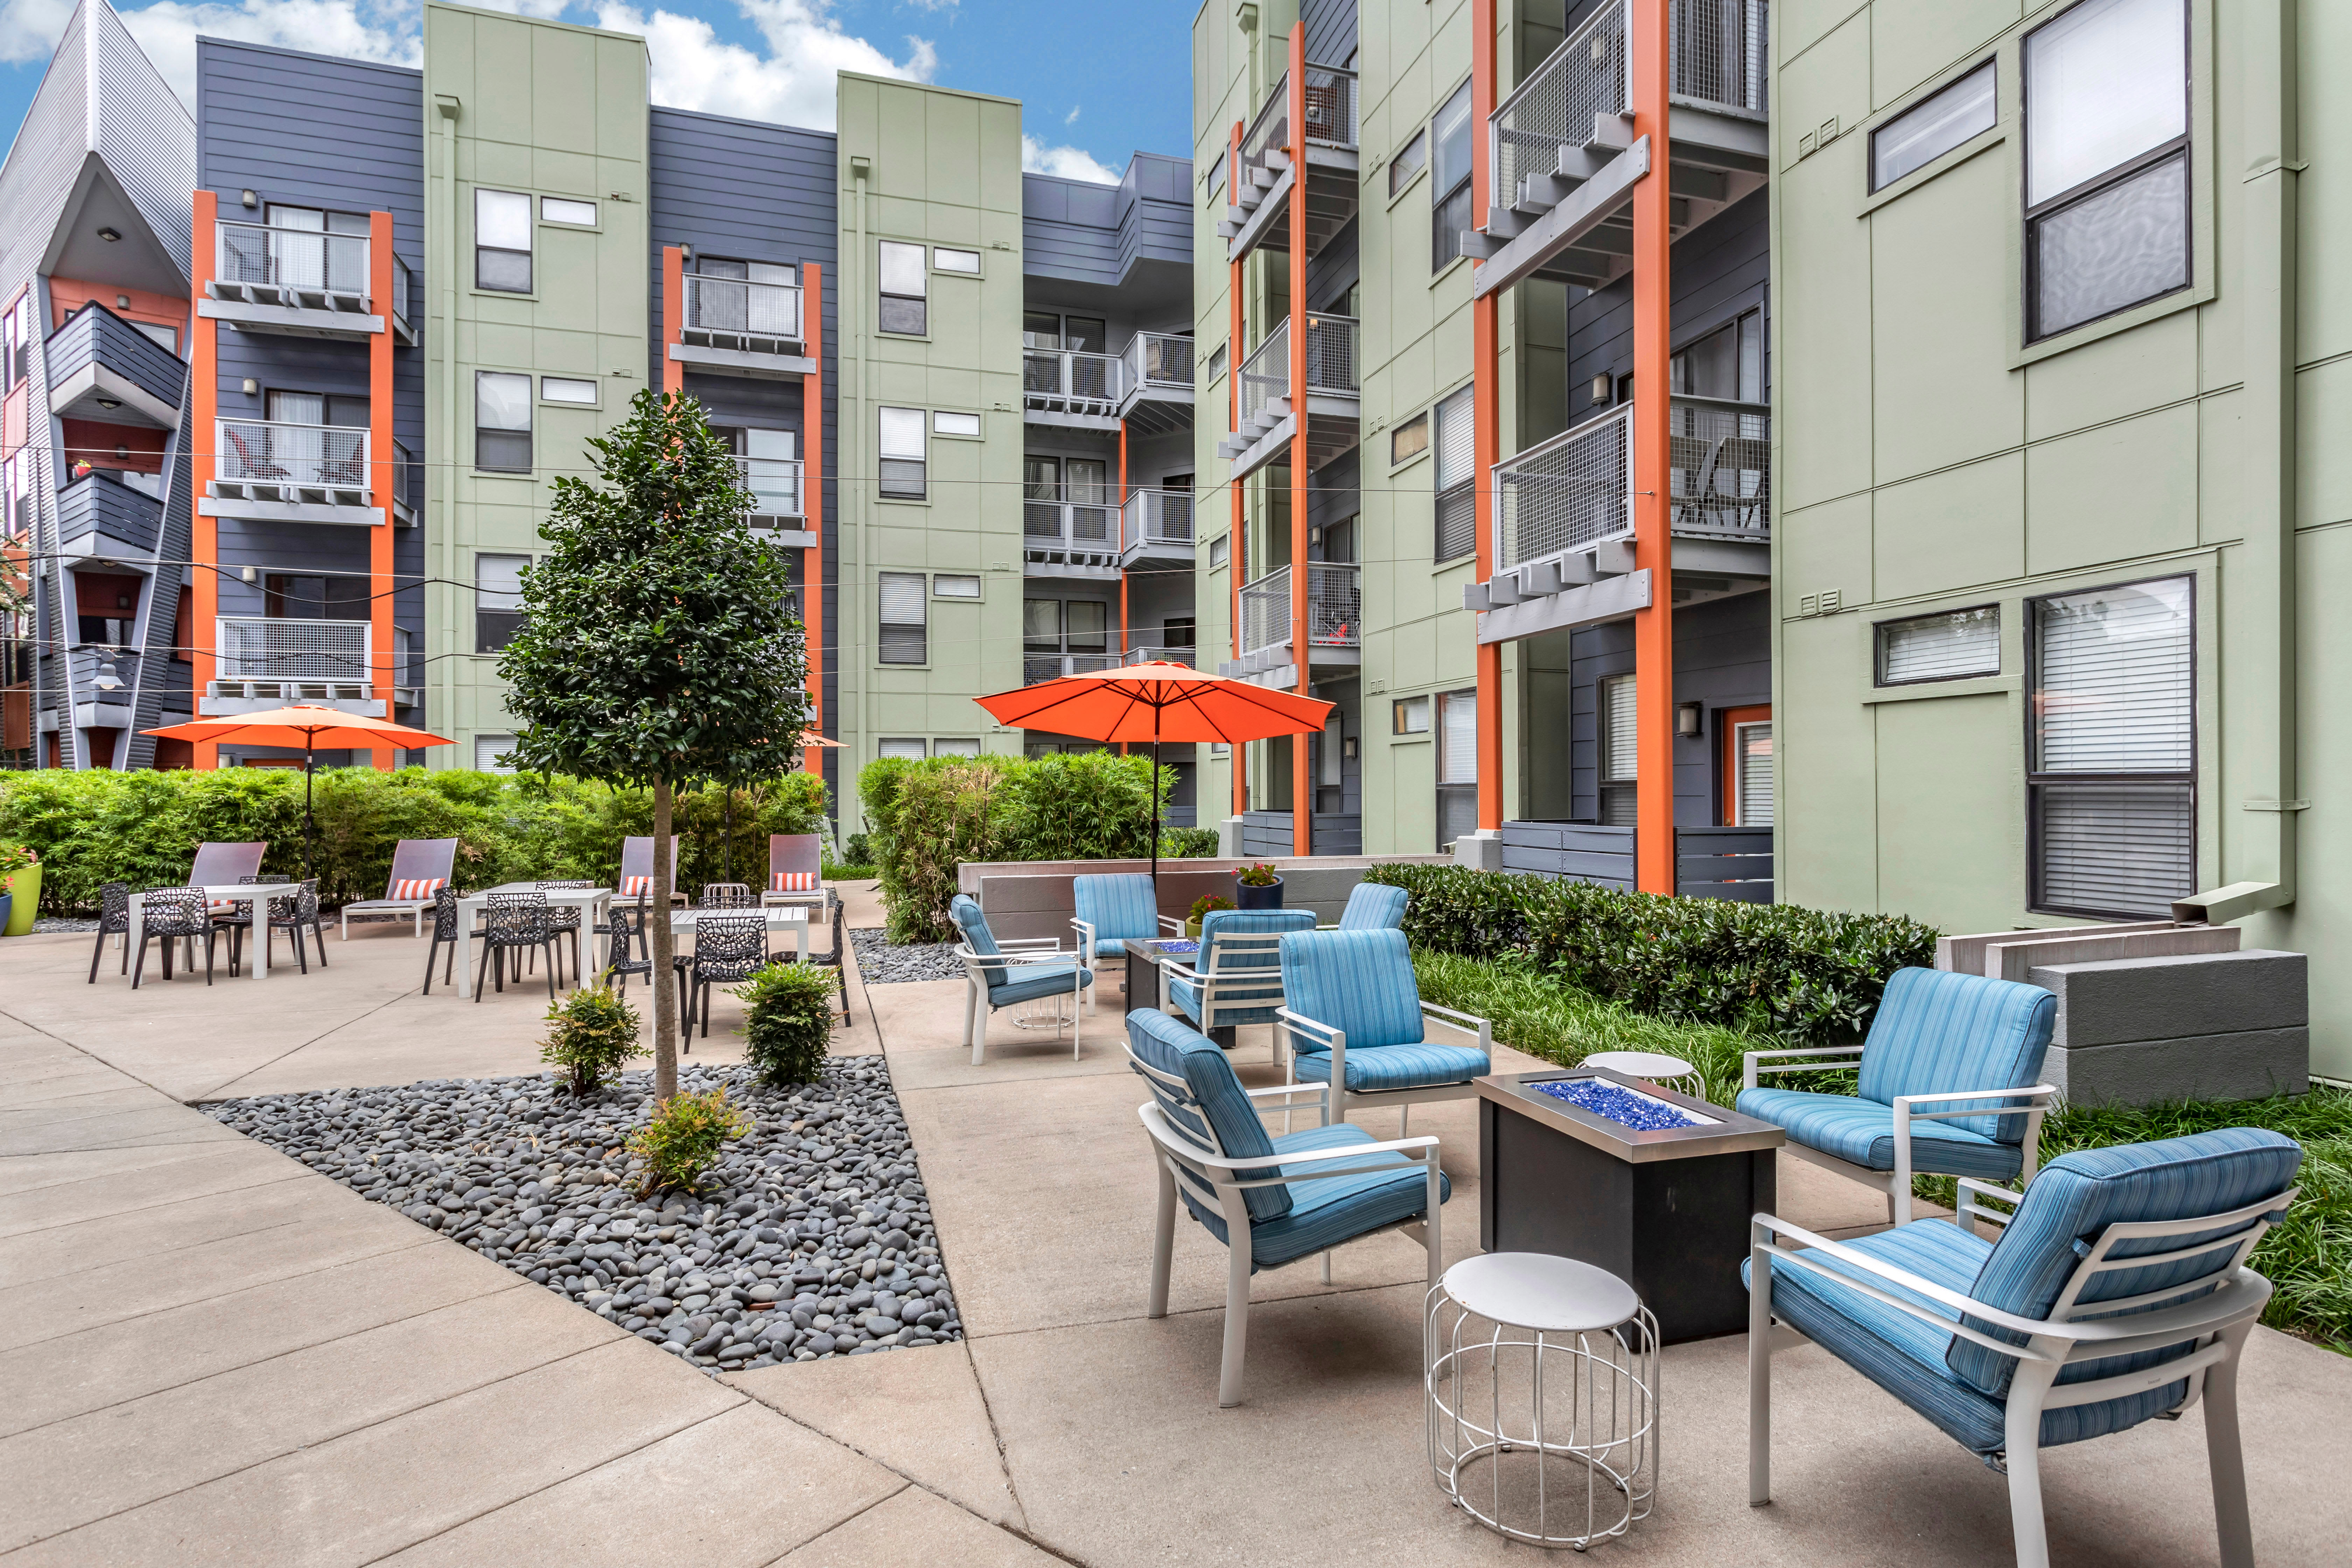 Beautifully maintained exterior courtyard at Olympus Midtown in Nashville, Tennessee